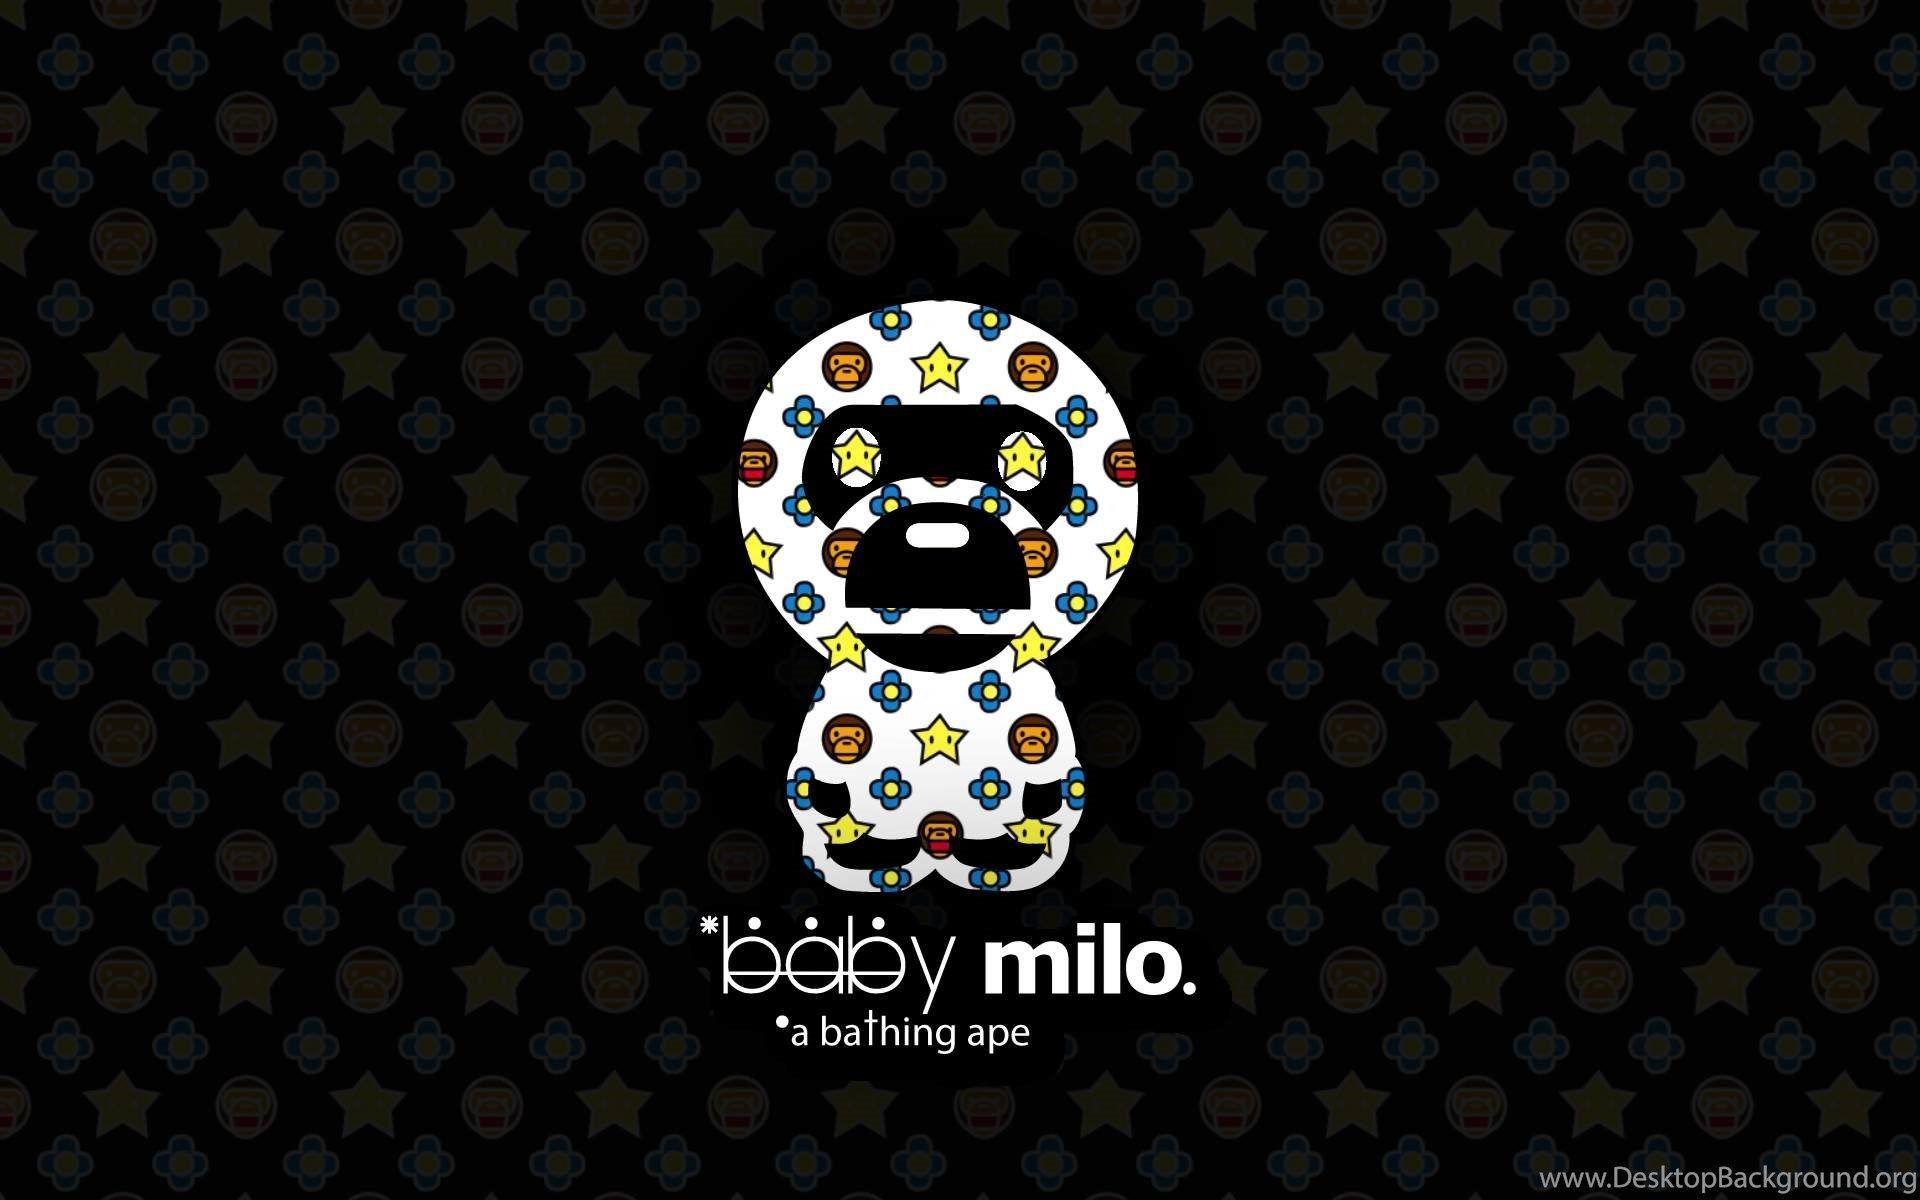 High Resolution Awesome Bape Milo Wallpaper HD 6 Full Size